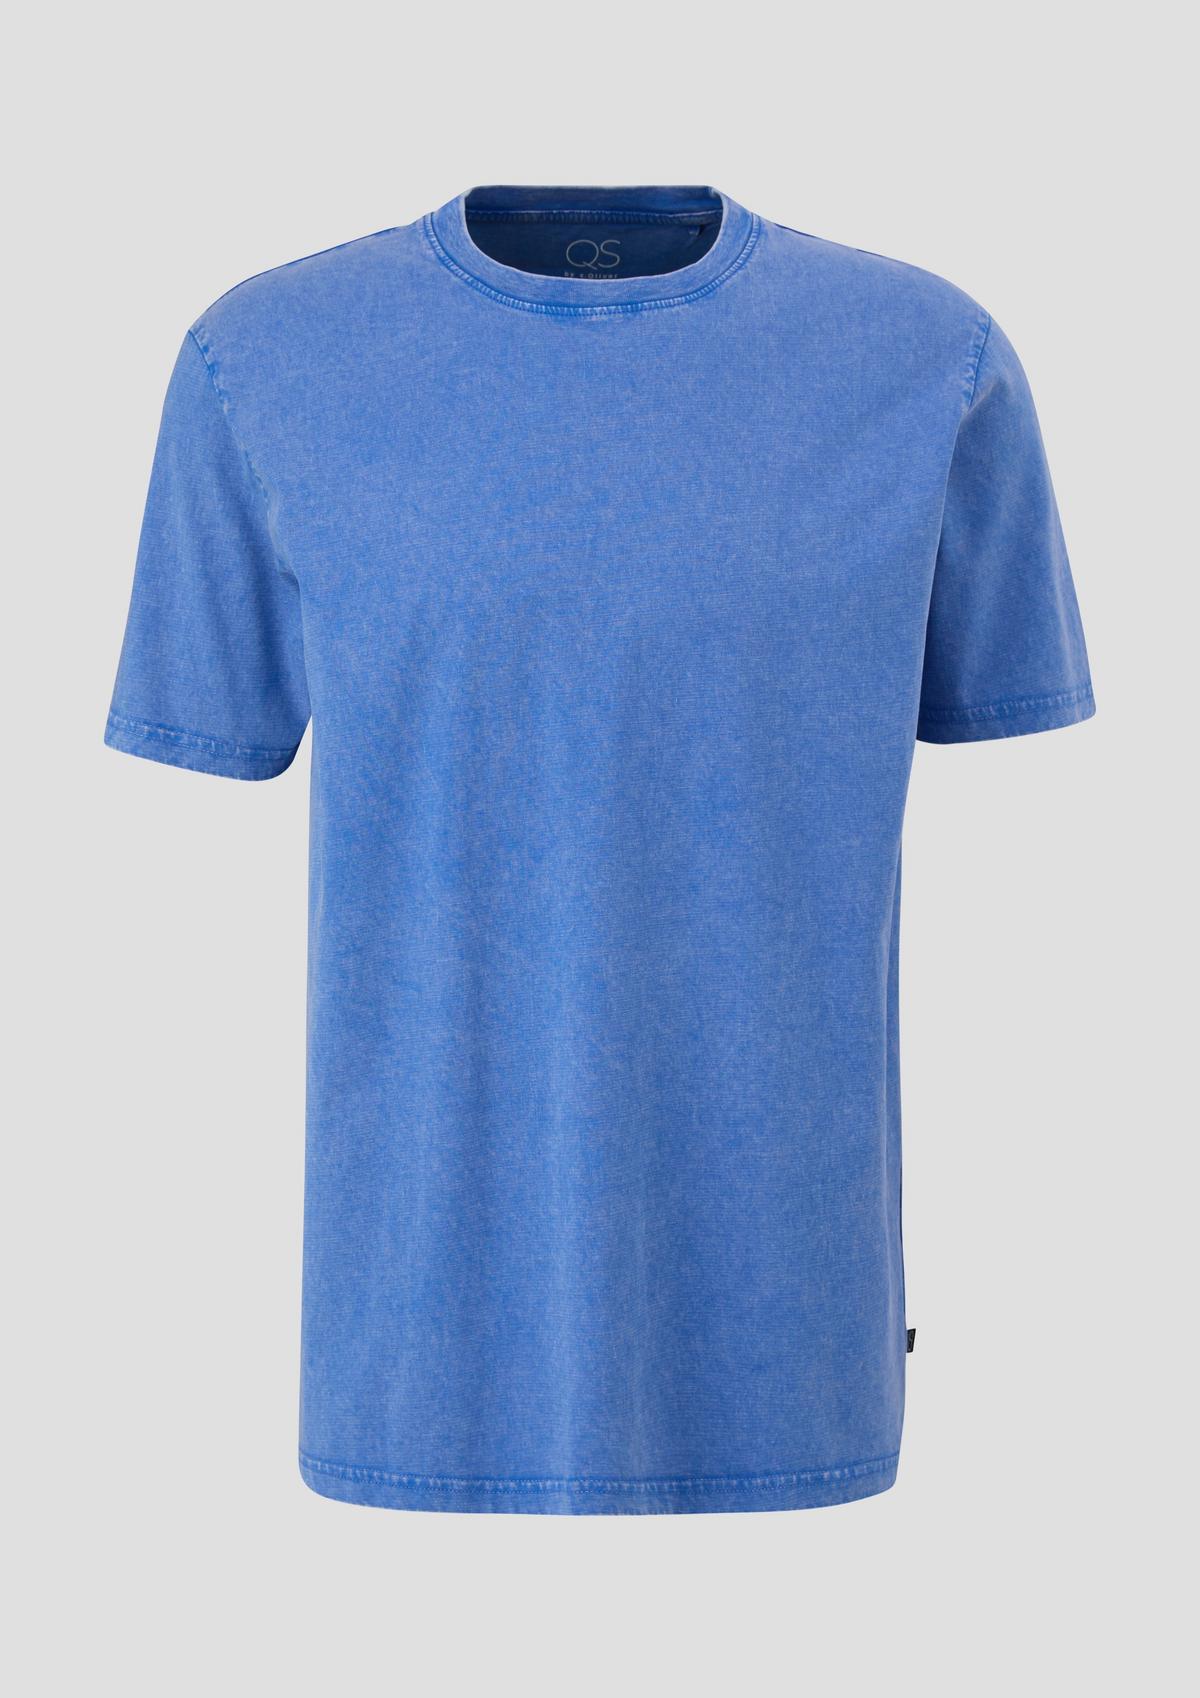 s.Oliver Garment-dyed cotton top